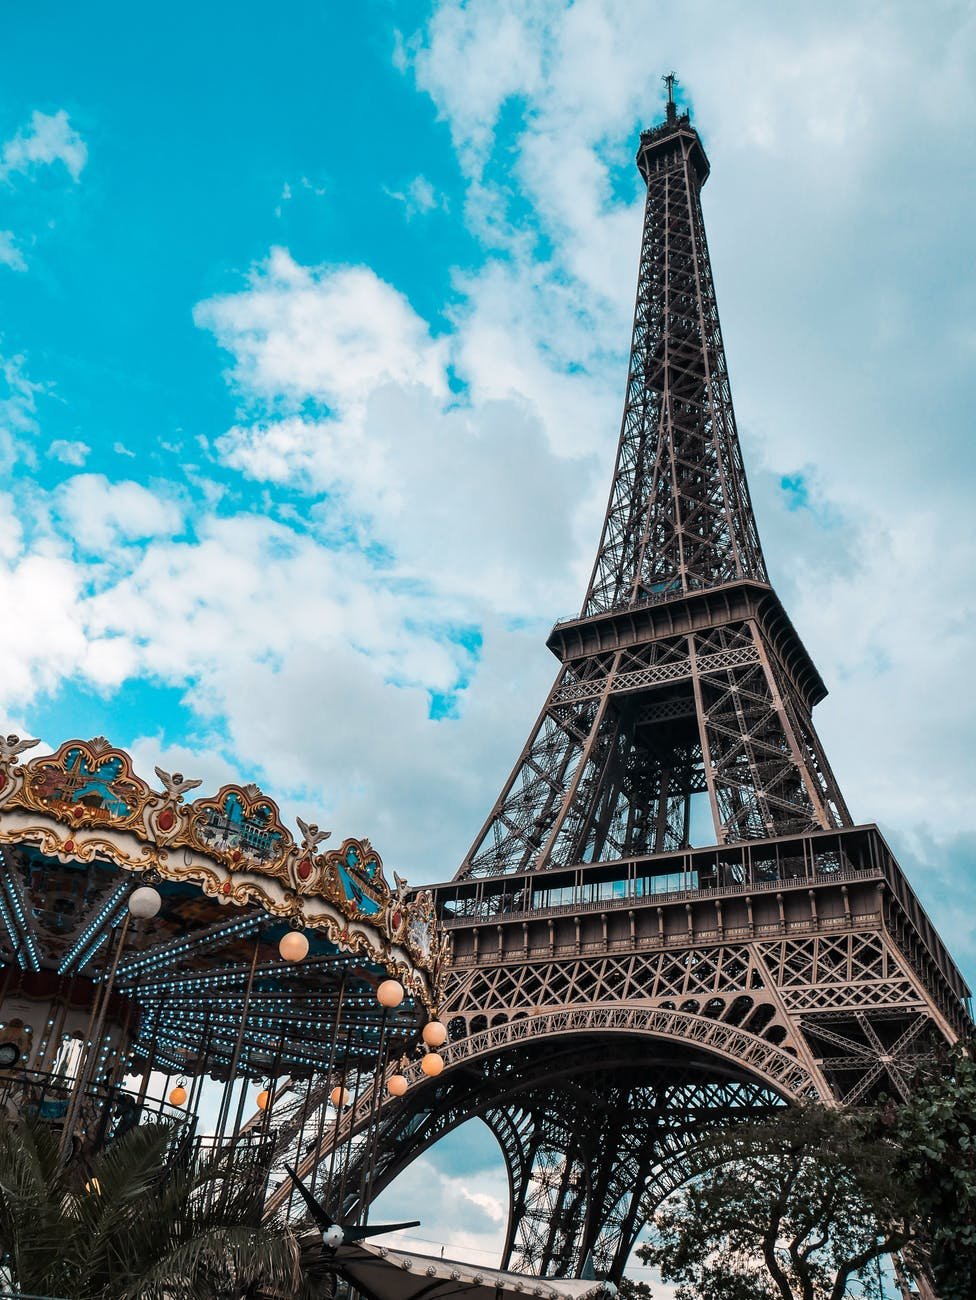 low angle photo of the eiffel tower with carousel in the foreground